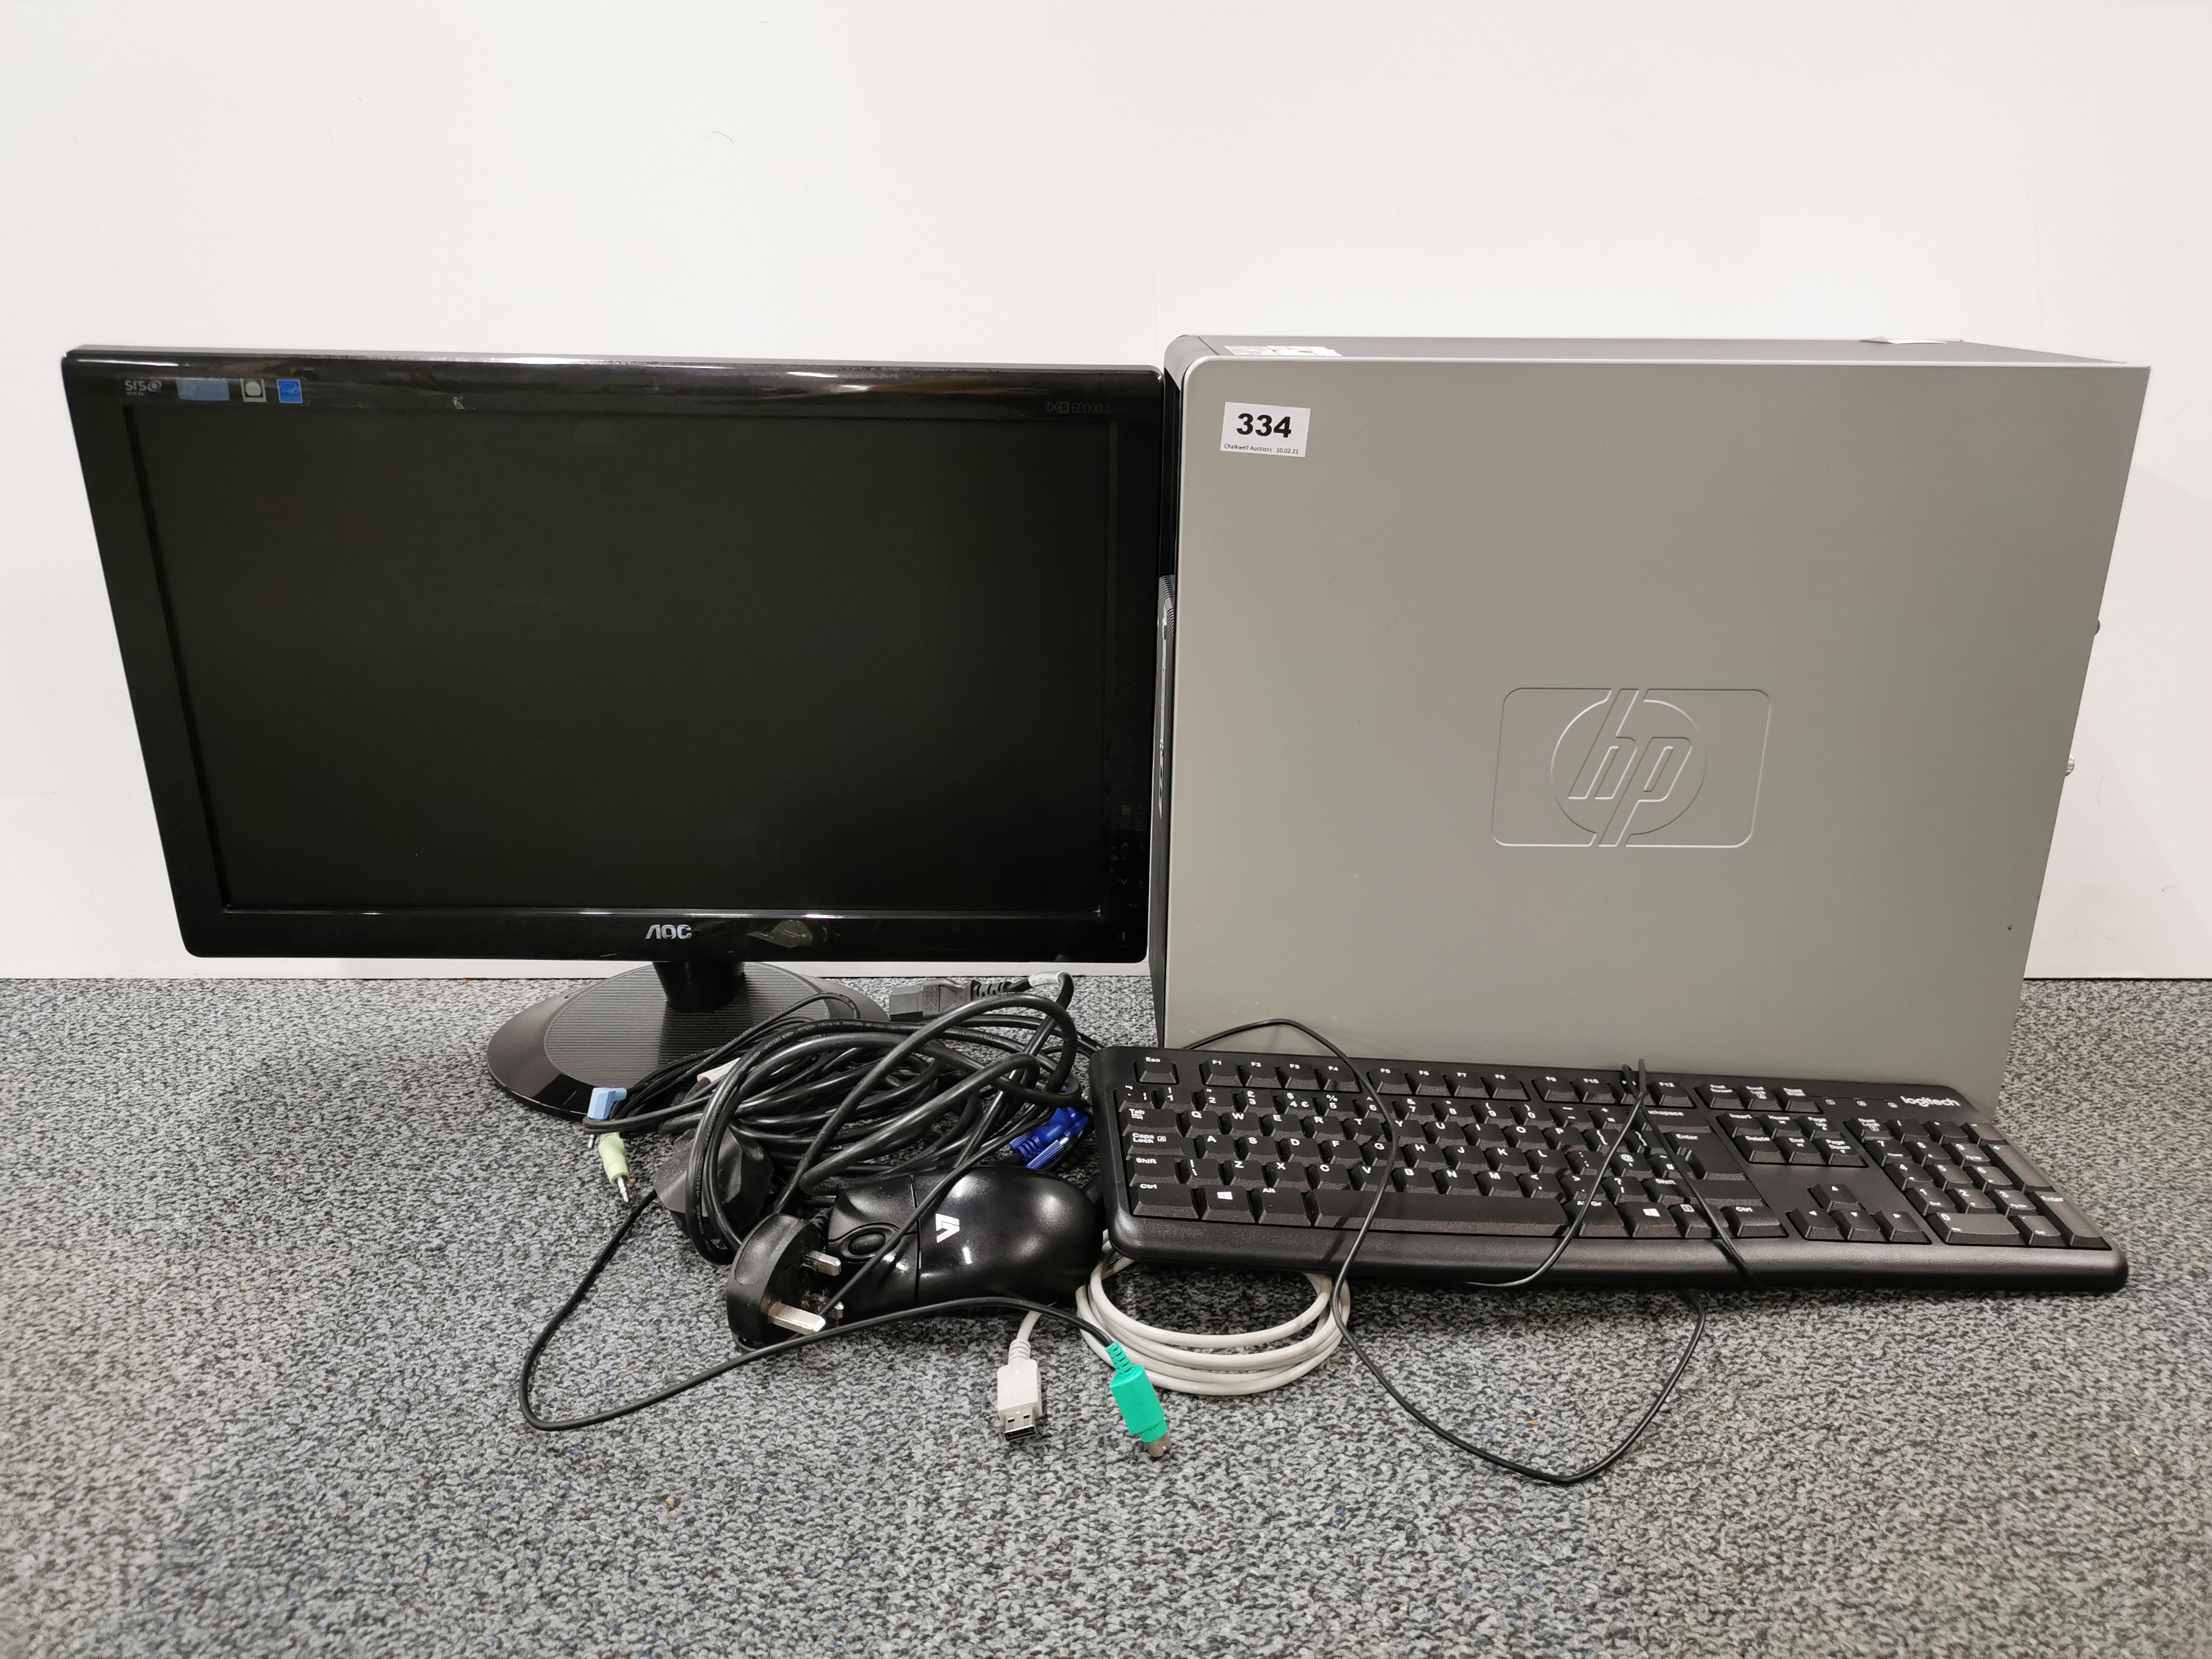 An HP desktop computer with monitor, recently refurbished.